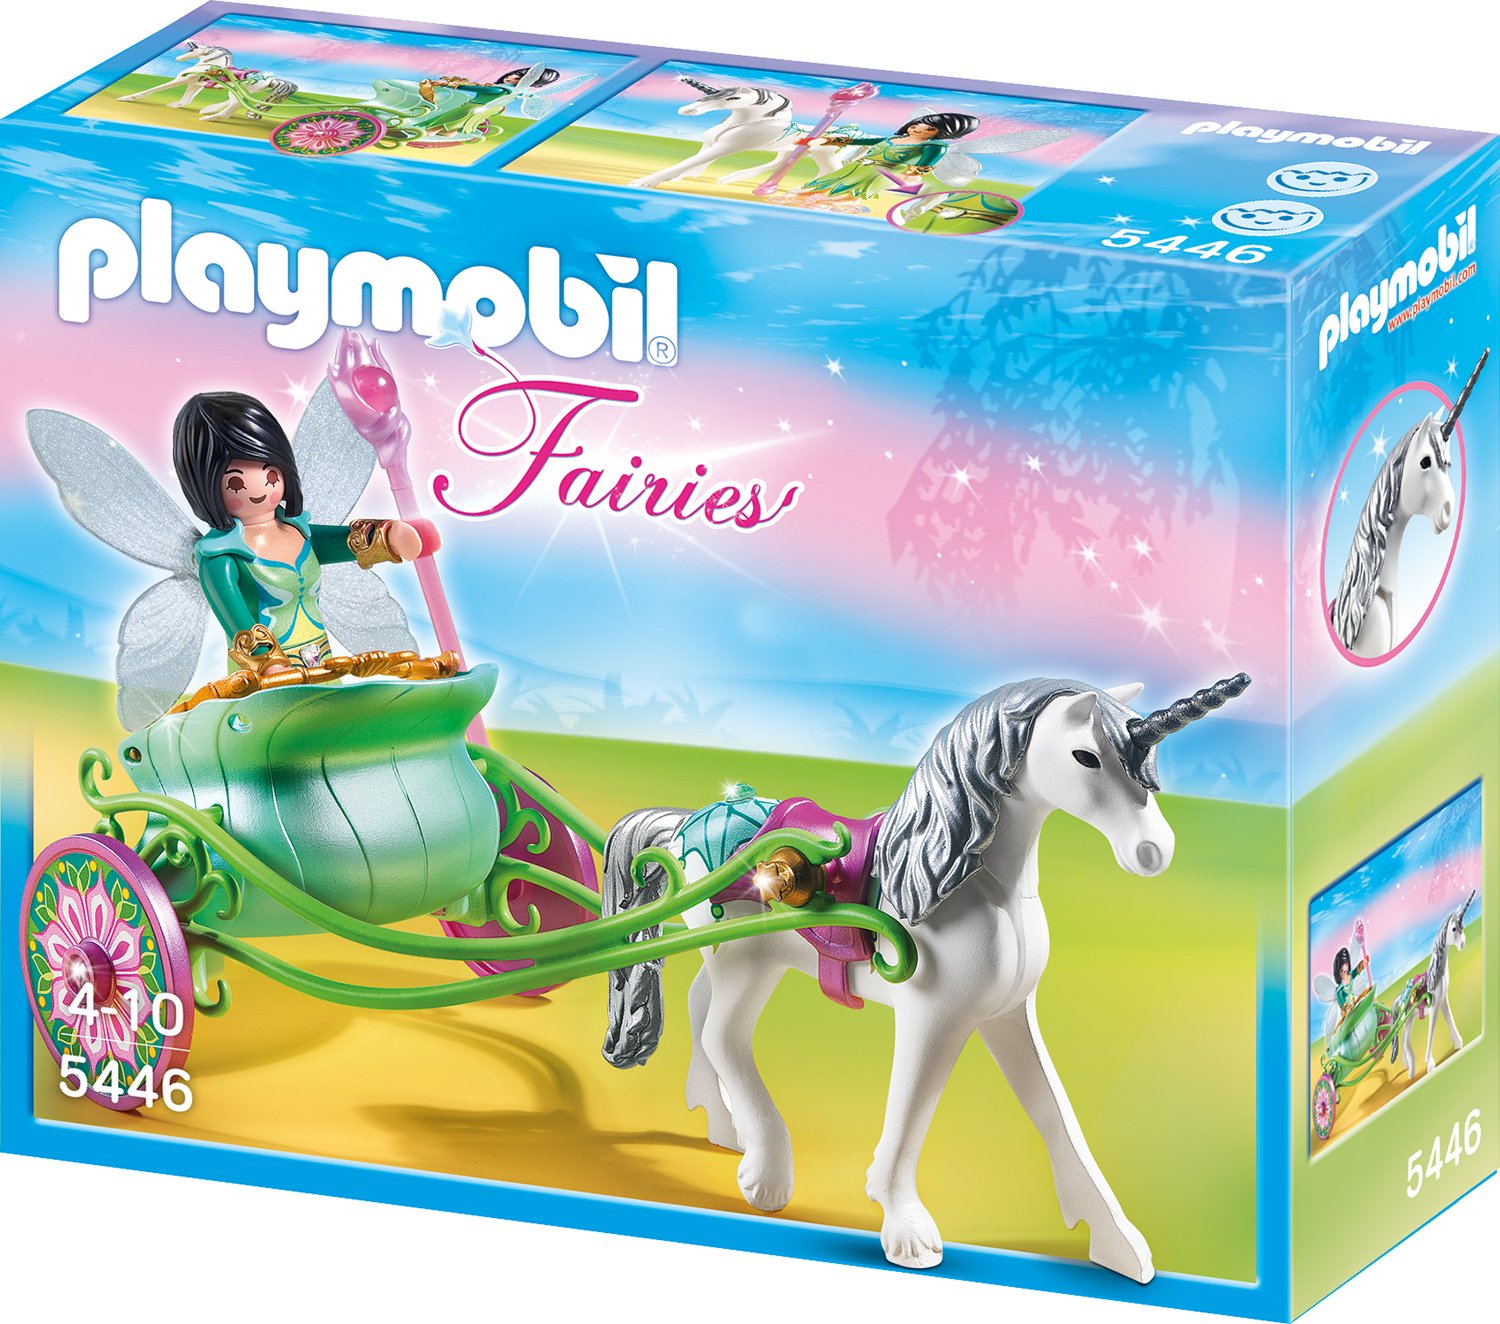 Playmobil Unicorn Carriage With Butterfly Fairy